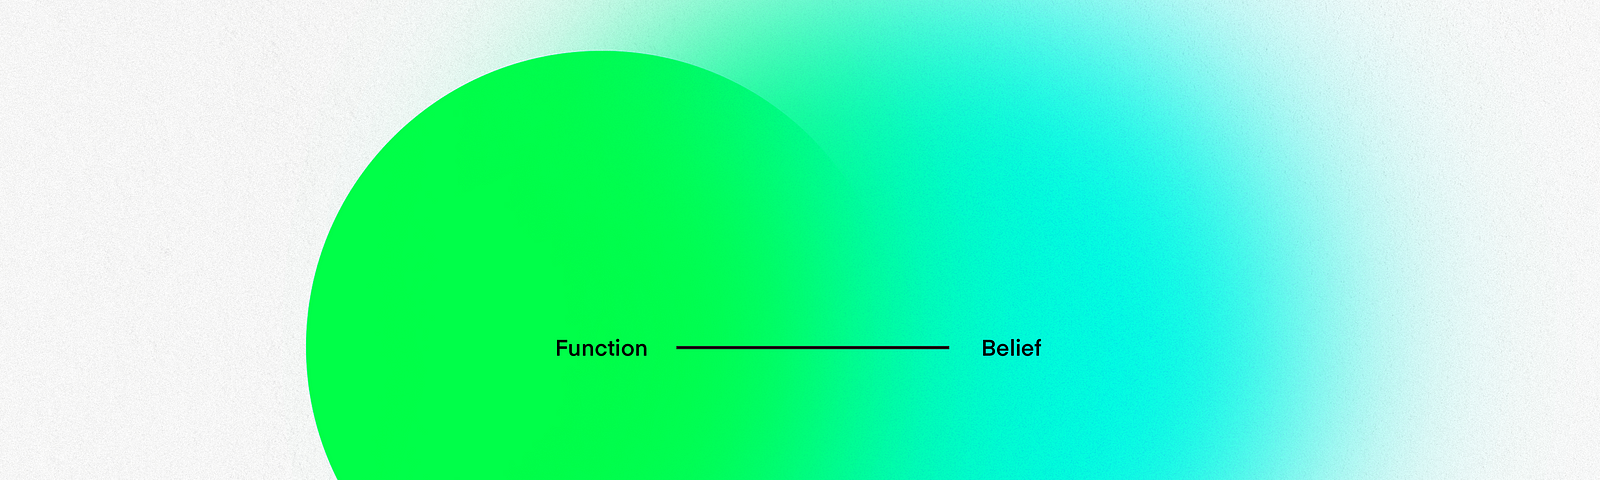 Two inter-connected circles. On the left, a solid green circle represents the “functional” aspects of a product or service. On the right, a larger blurred blue circle represents the more abstract and emotional aspects of “belief” in a product or service. The two circles blend in the middle with a connecting black line.